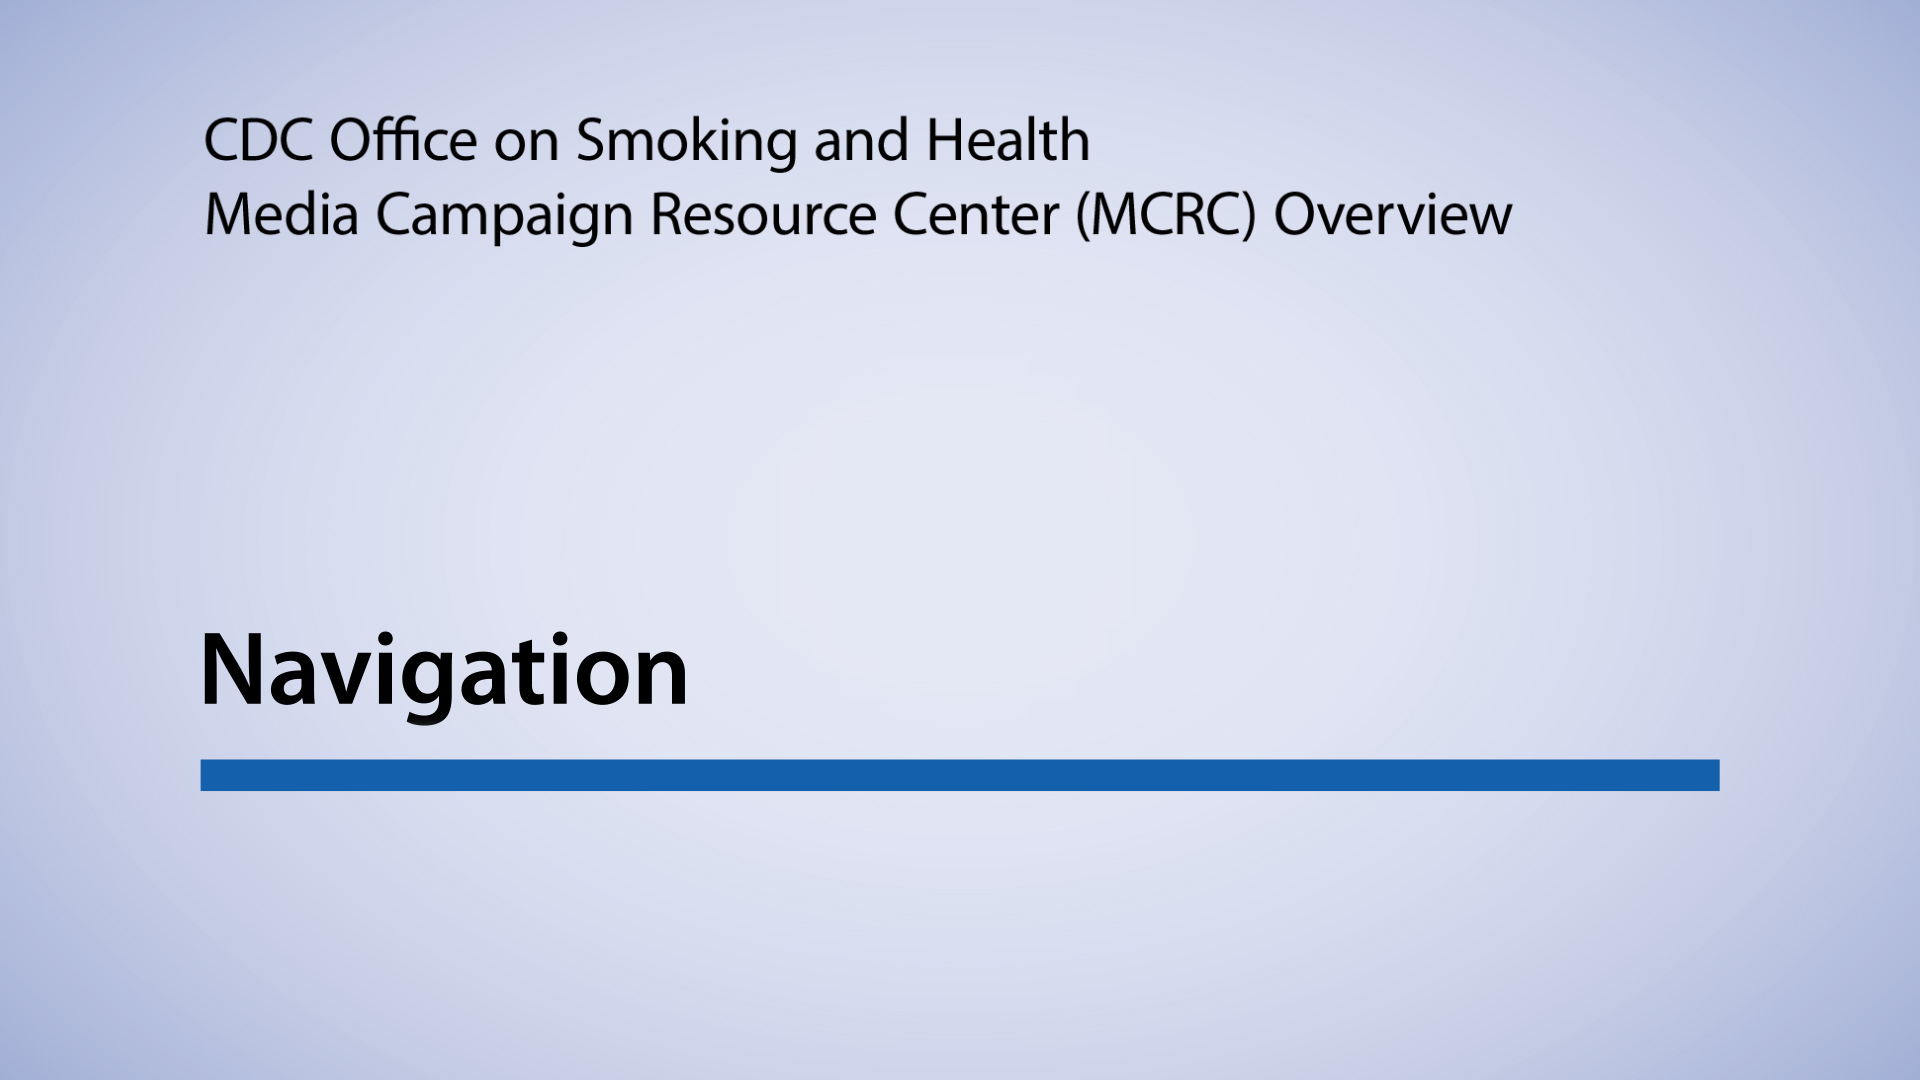 mcrc overview series, video i: navigating the mcrc